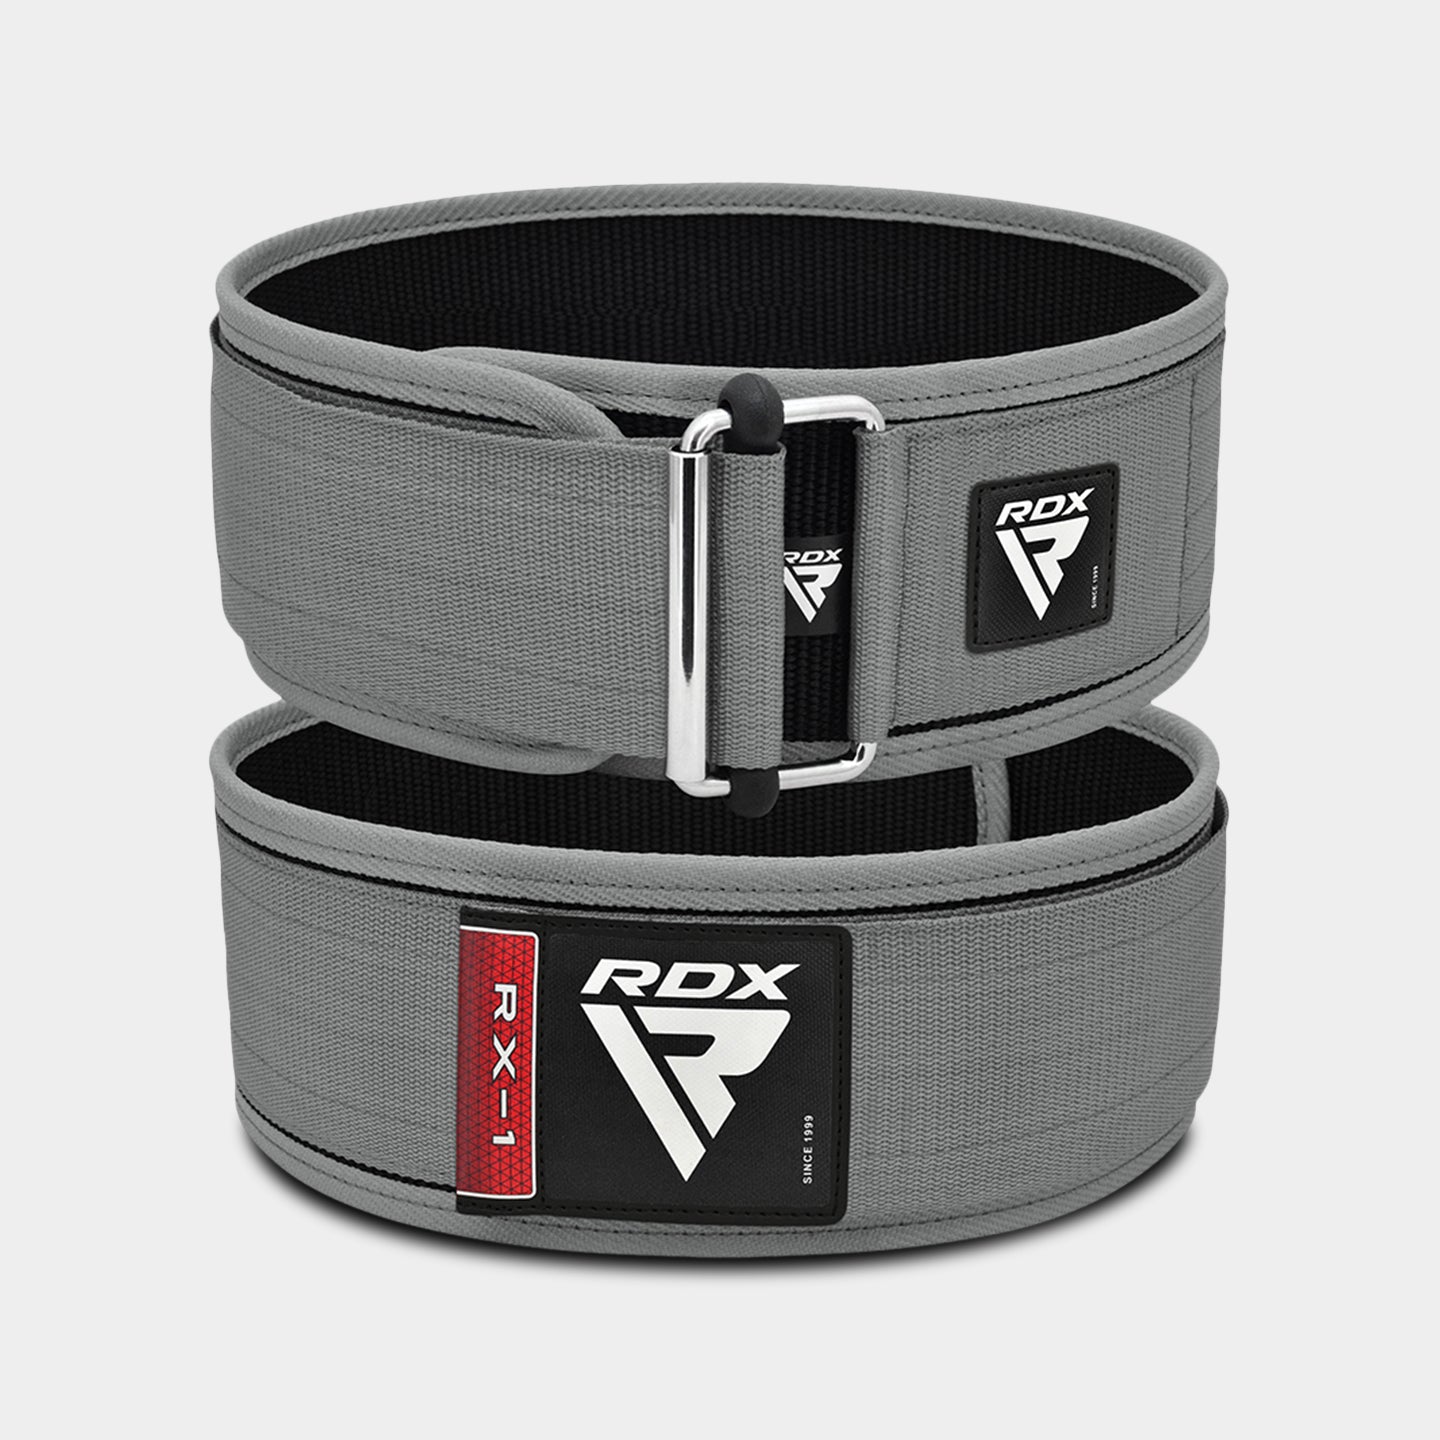 RDX Sports RX1 Weightlifting Belt, S, Gray A1